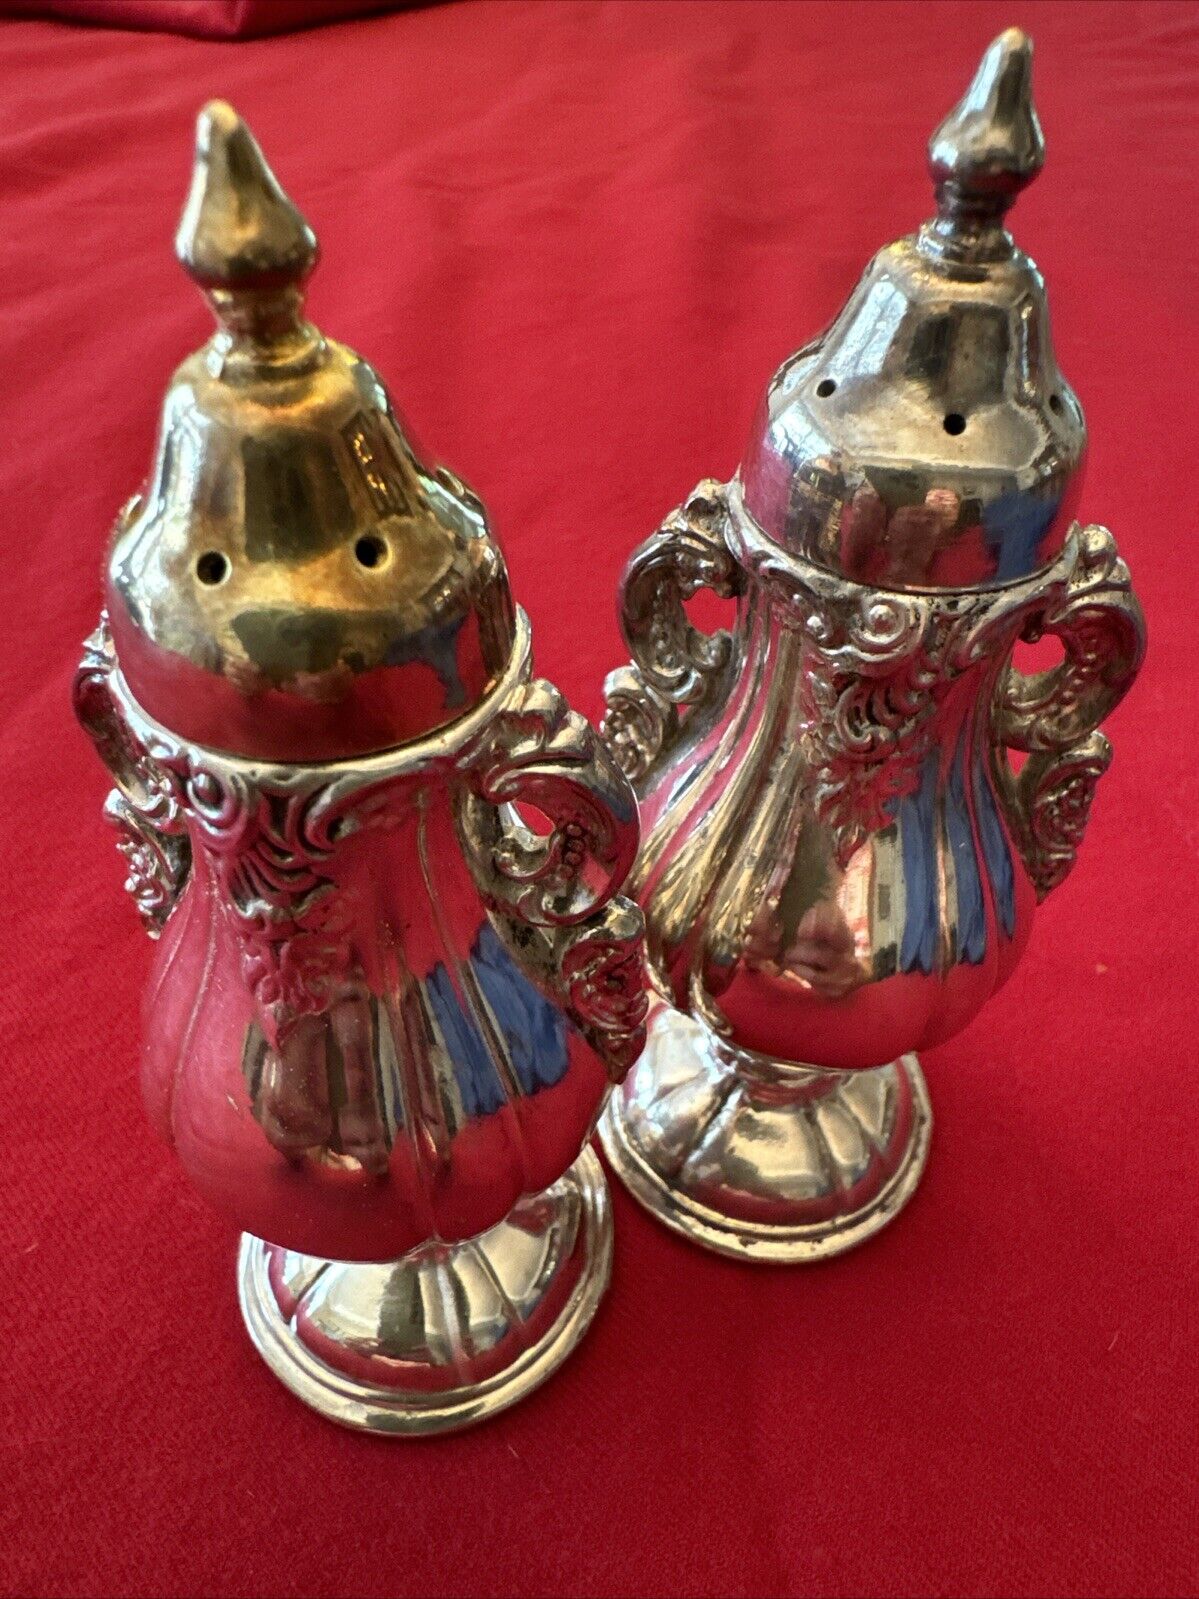 Vintage Wallace Silverplated Baroque Salt and Pepper Shakers 5” With Silver Bag